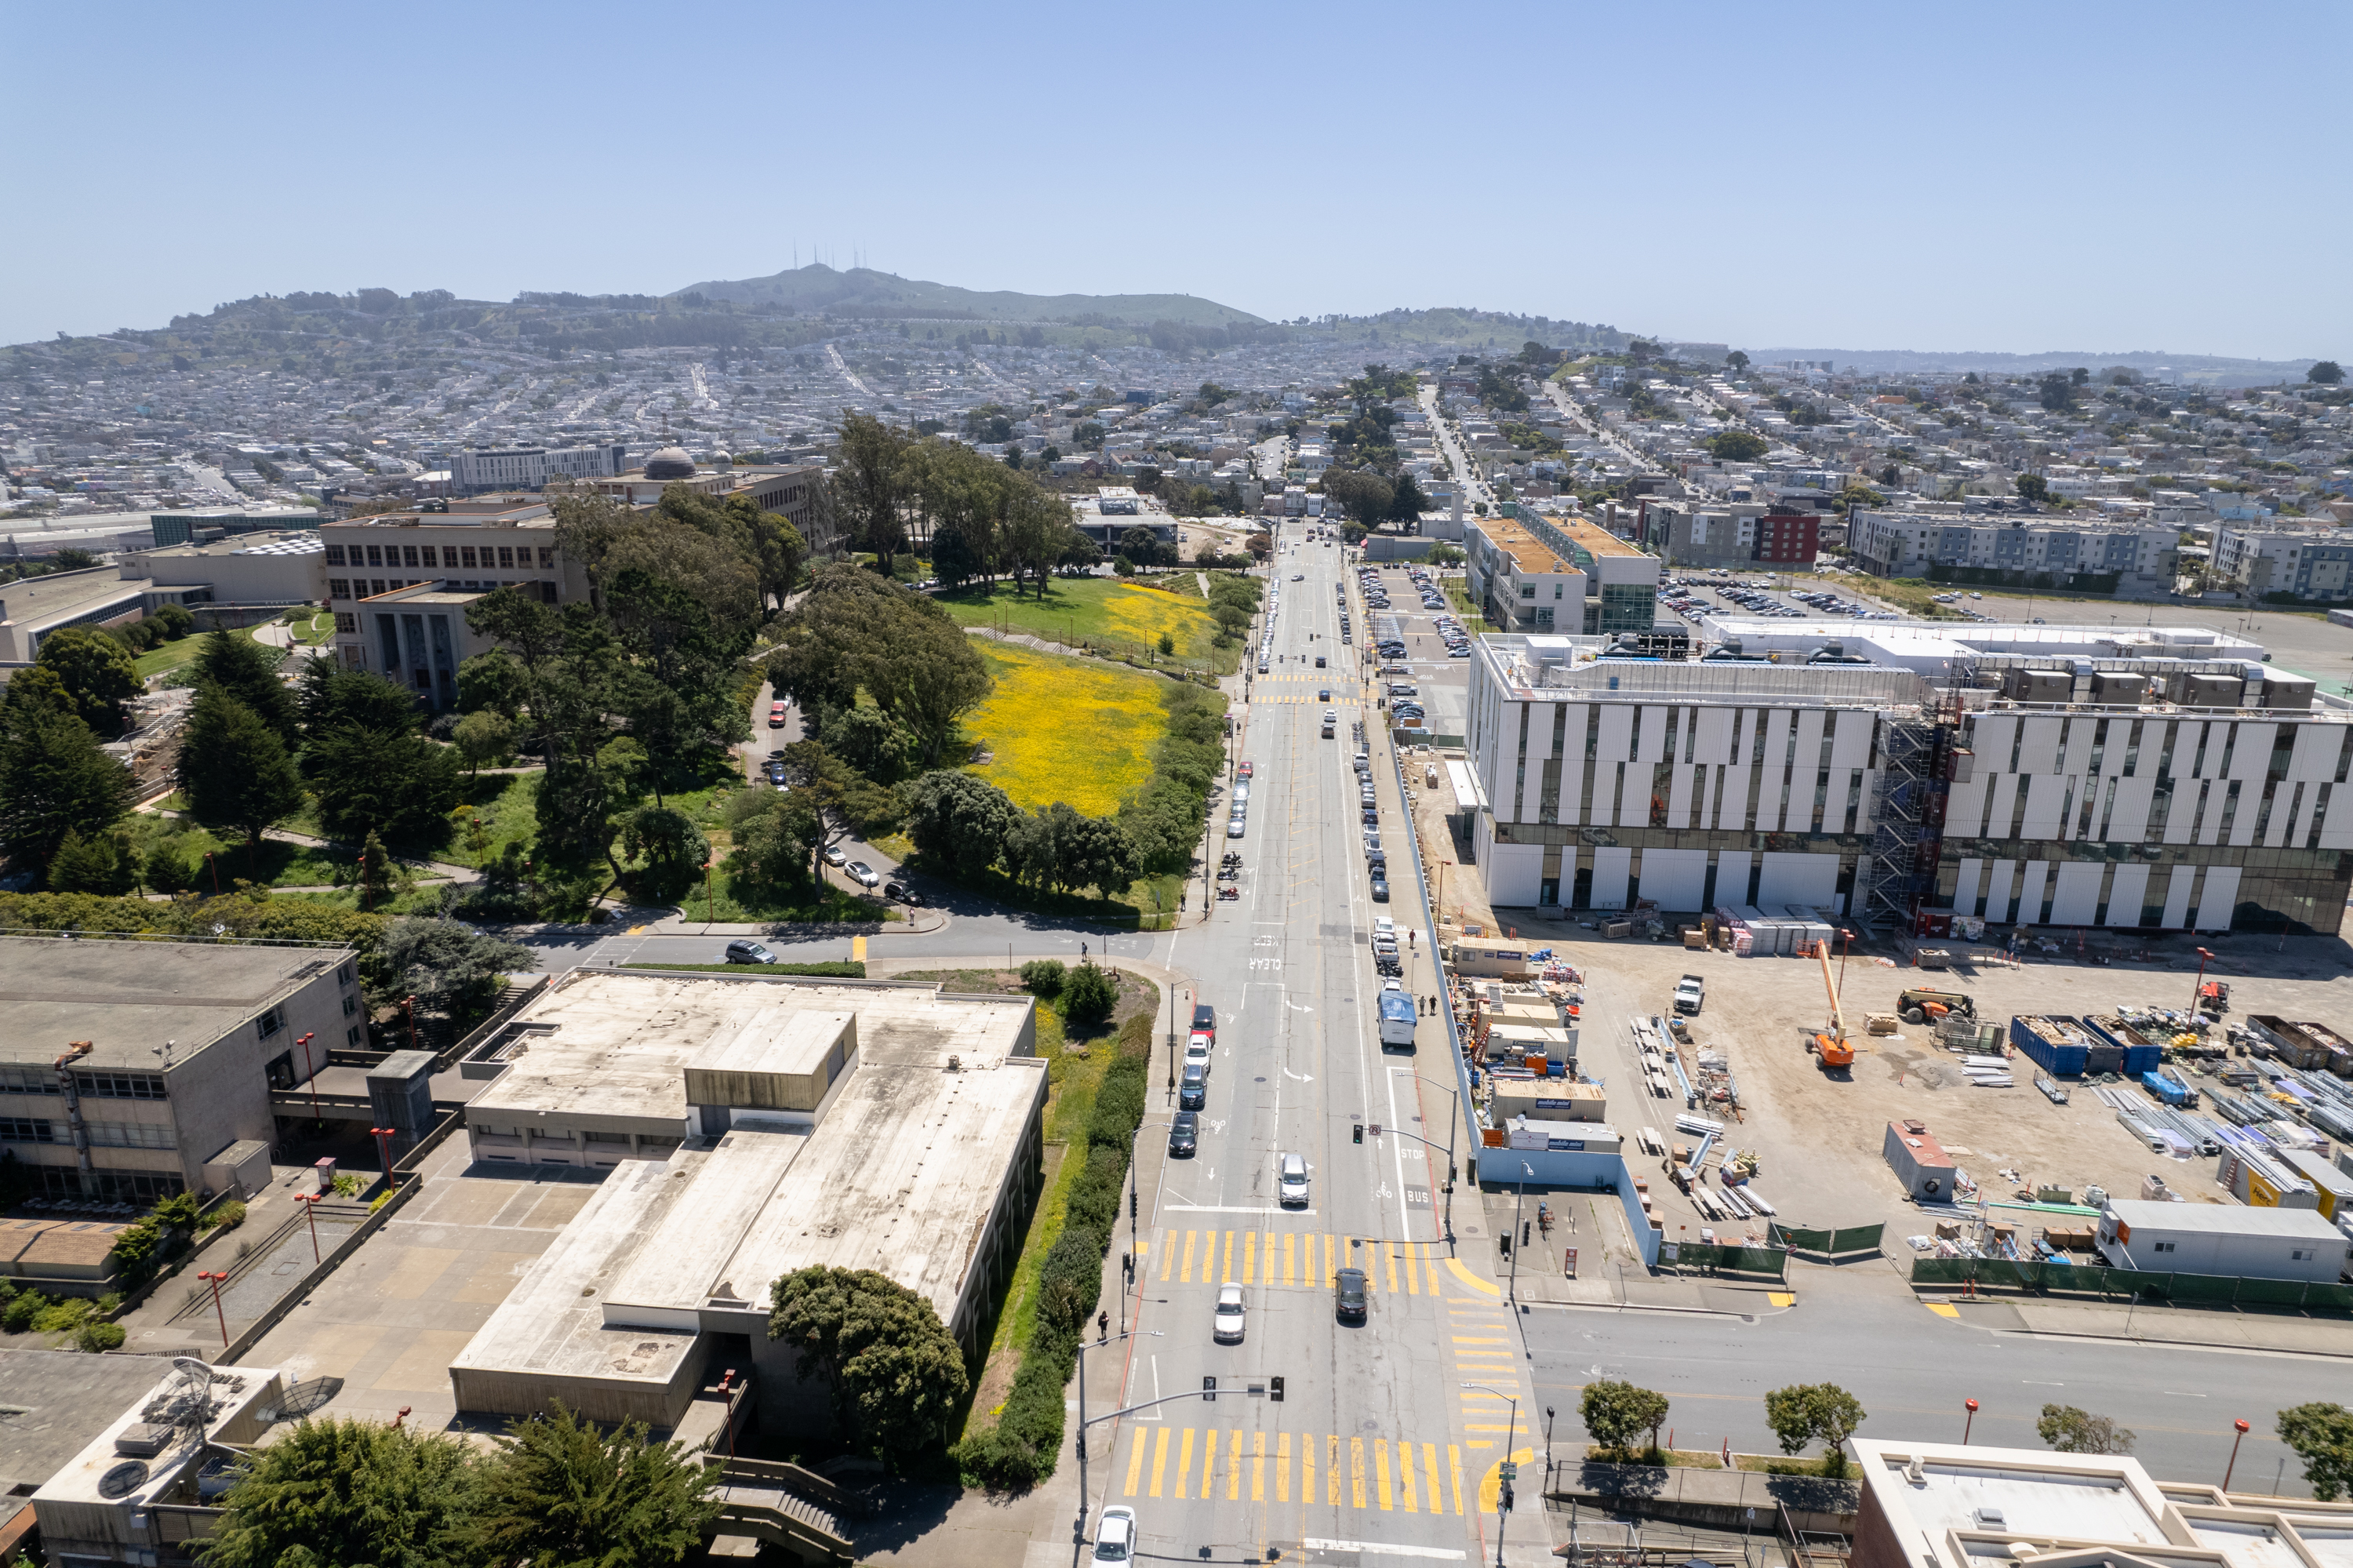 Aerial view of a city street with buildings, construction, green spaces, and distant hills on a clear day.